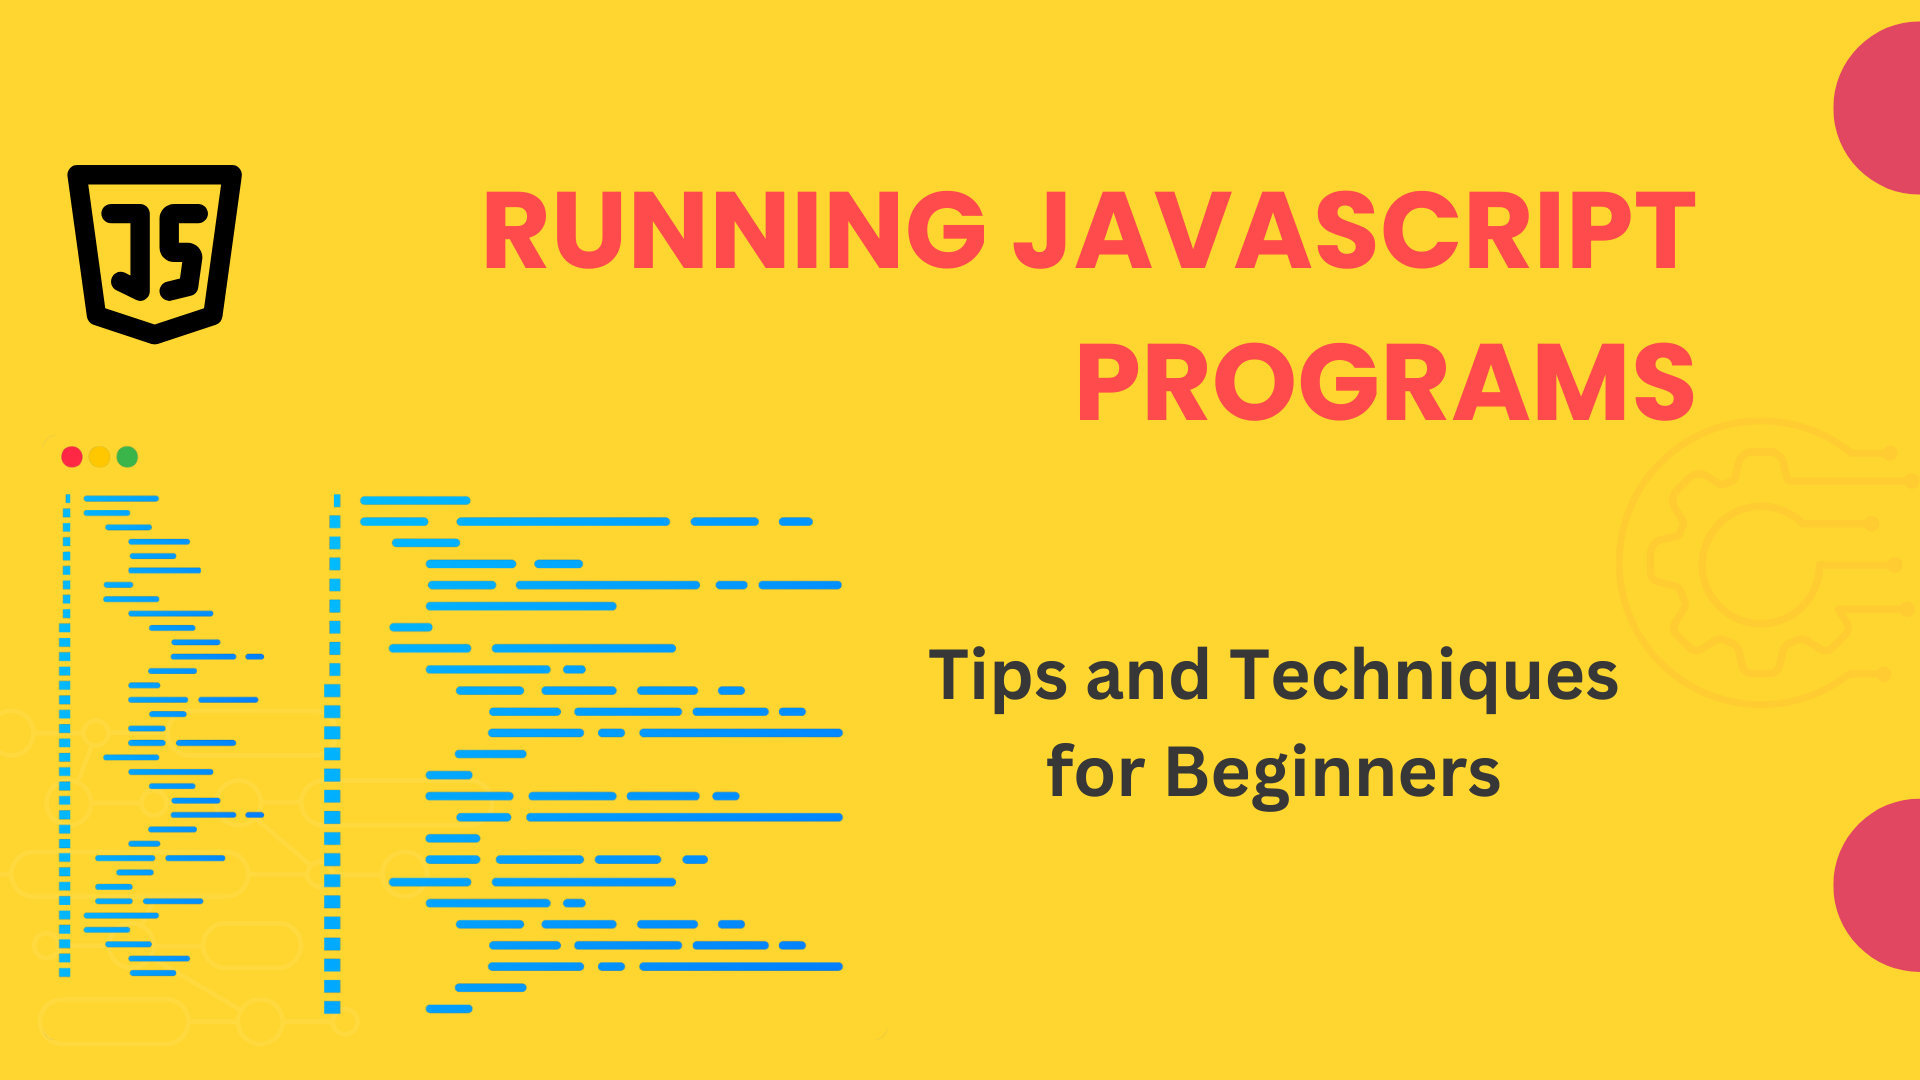 Running JavaScript Programs: Tips and Techniques for Beginners